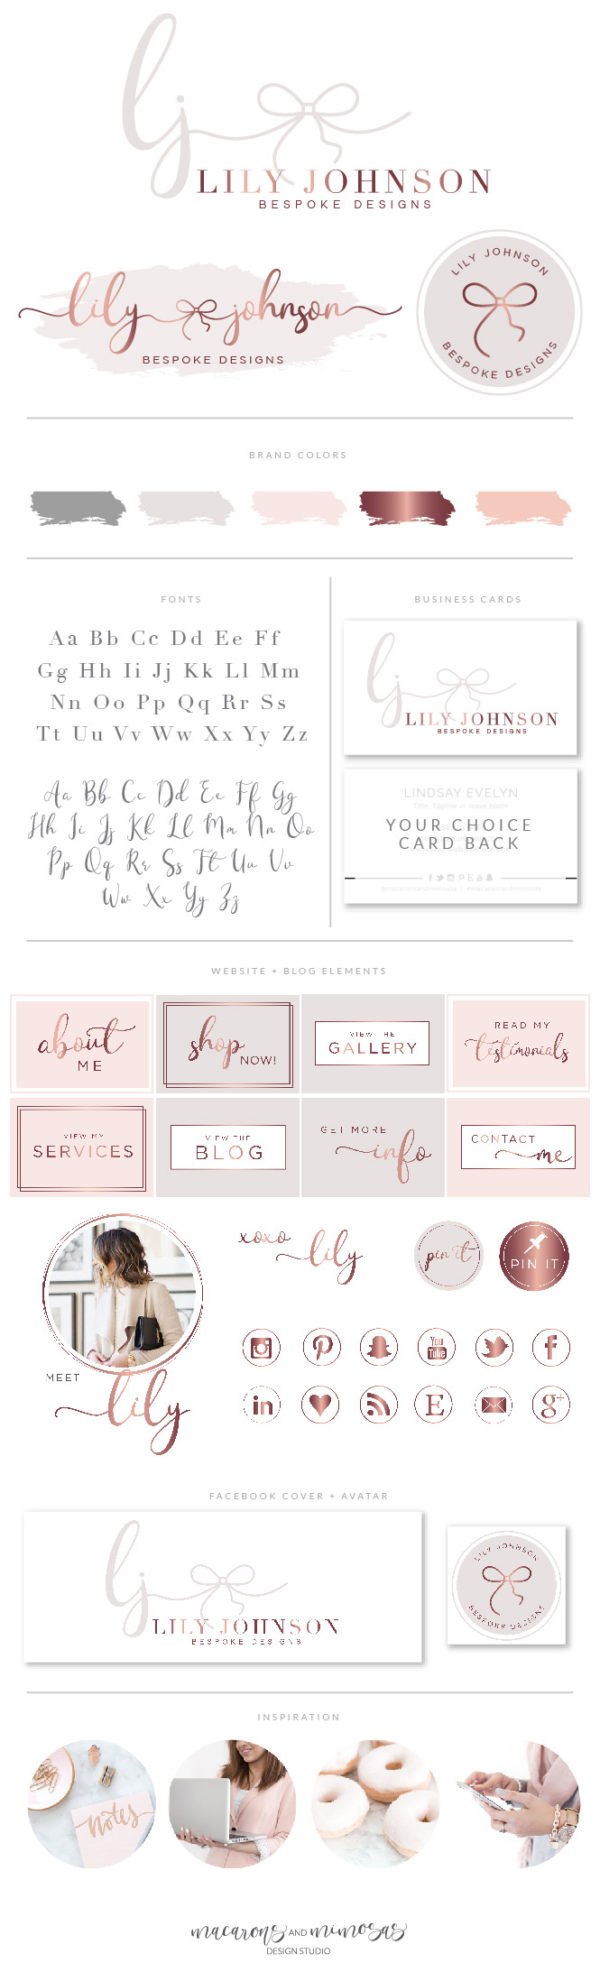 Watercolor Bow logo Design, Mint Blue Rose Gold Branding Package with Business Cards, Feminine Bow Shop Boutique Logo